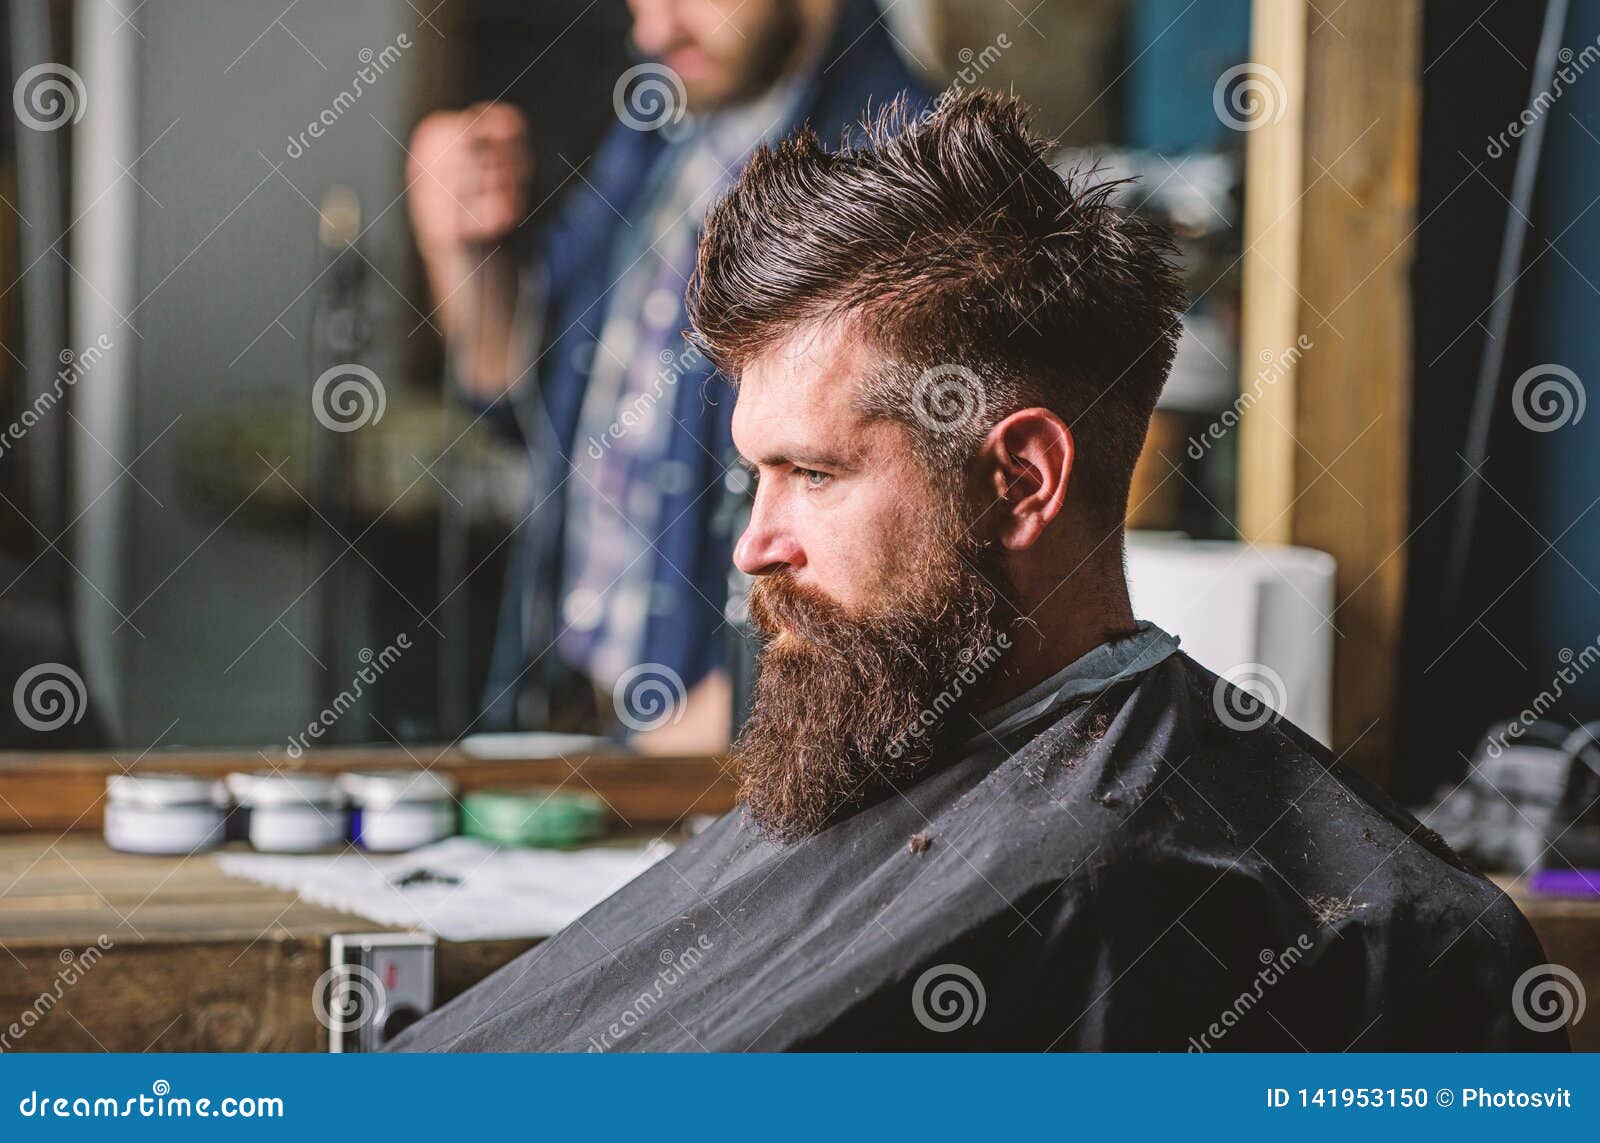 Man with Beard Covered with Black Cape Sits in Hairdressers Chair ...